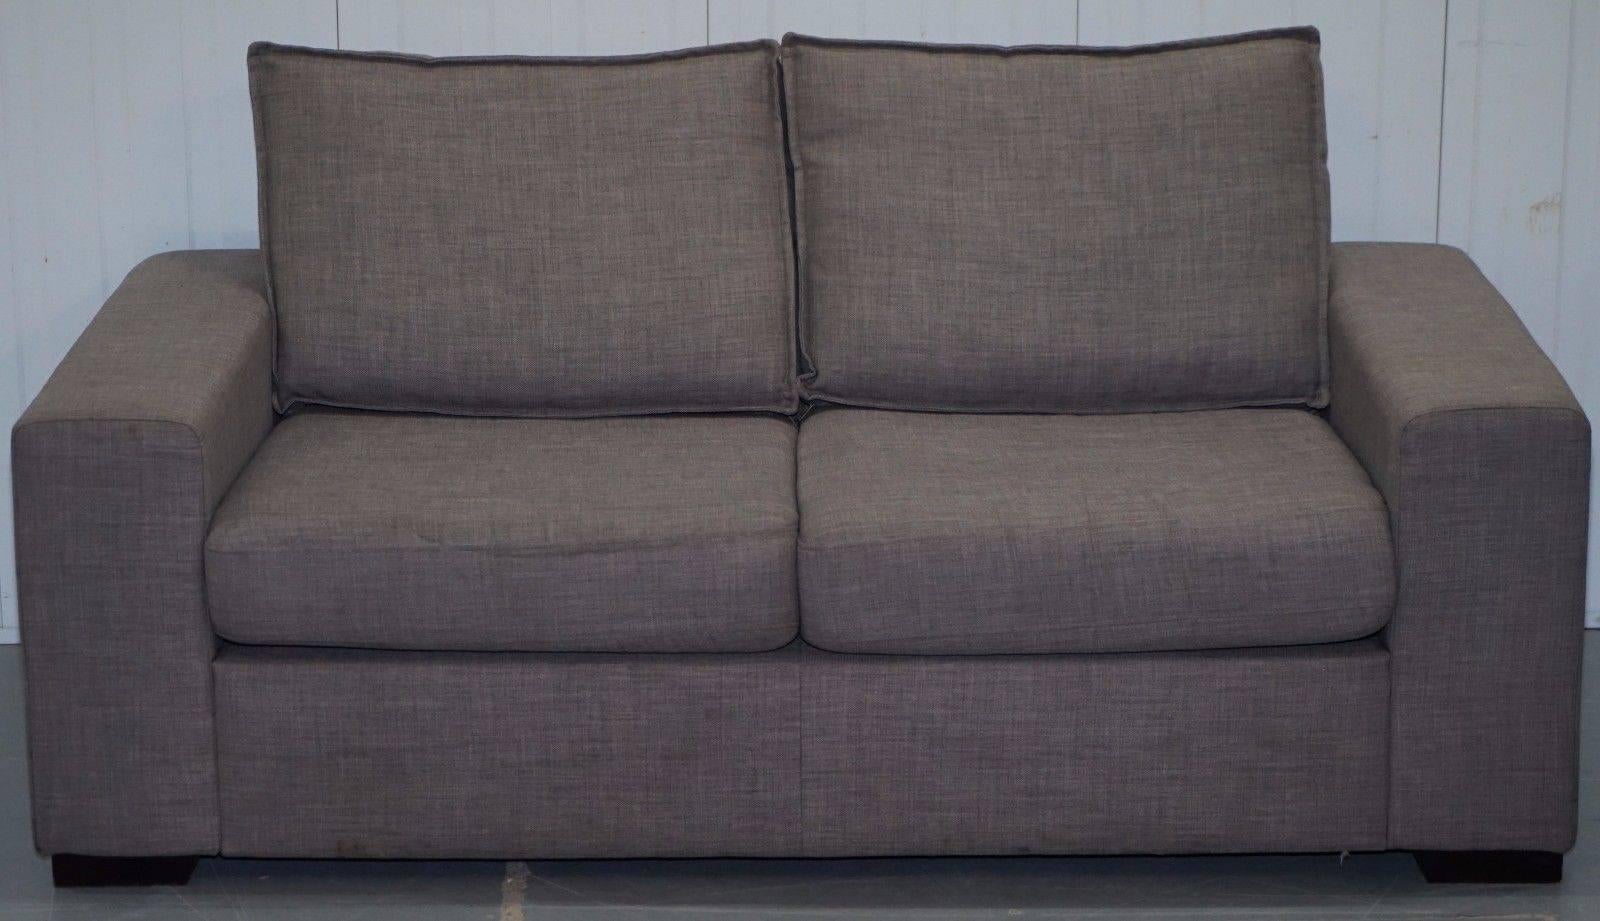 We are delighted to offer for sale this lovely Palomino grey shark tooth upholstery two-seat sofa

I’m unsure of the brand but everything else I purchased from this client was in the high thousands and every single piece was by a named known